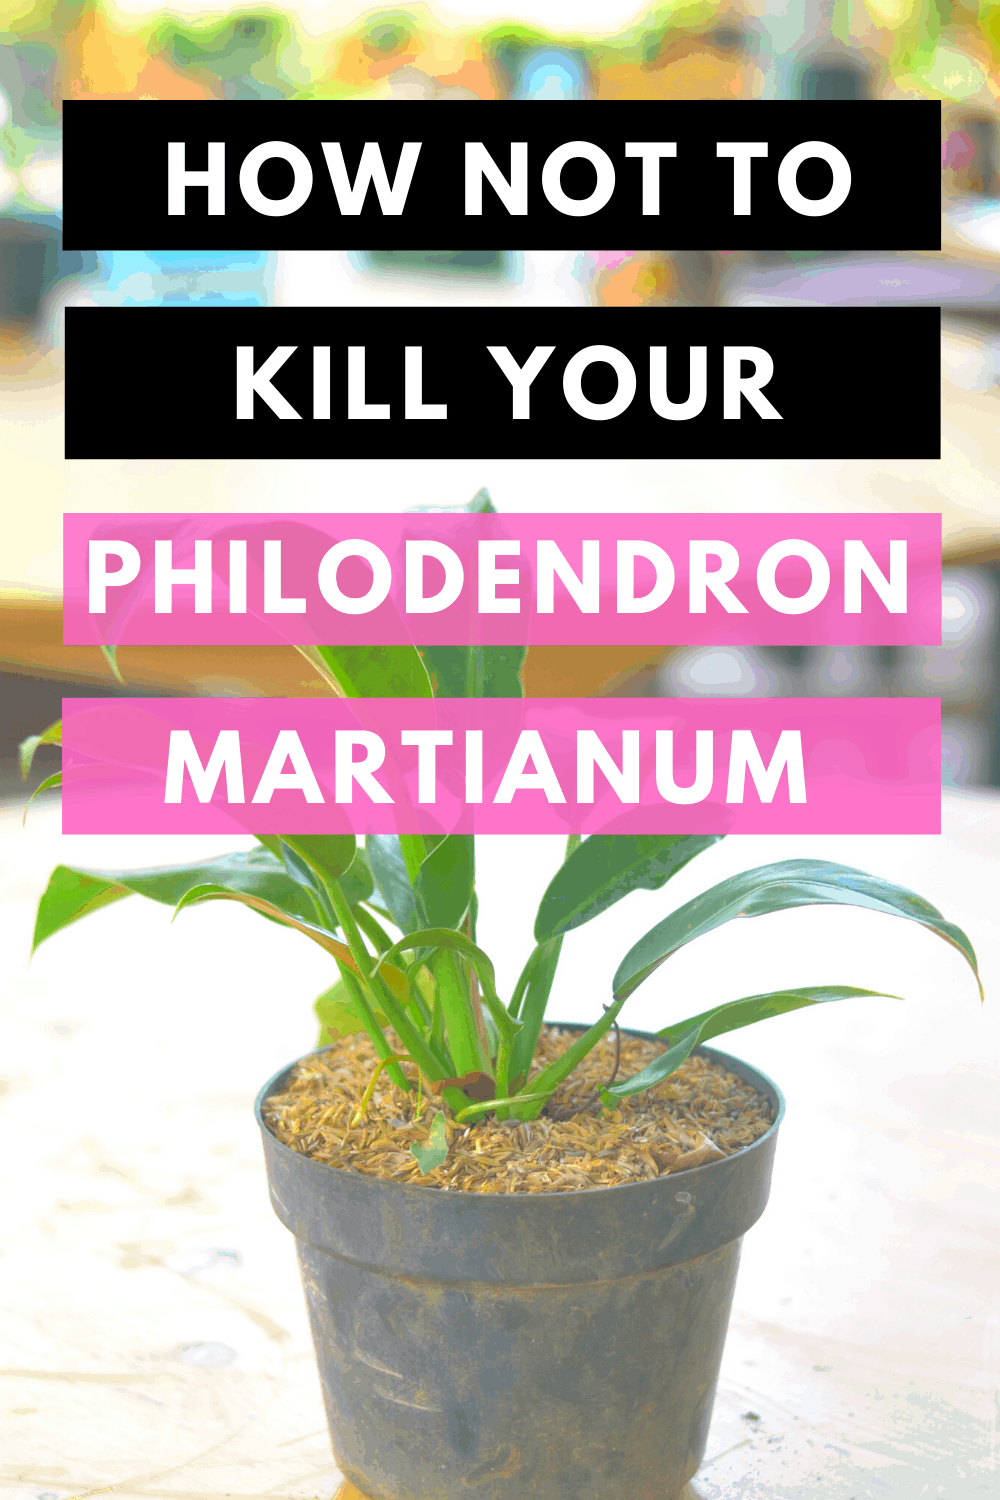 How Not To Kill Your Philodendron Martianum